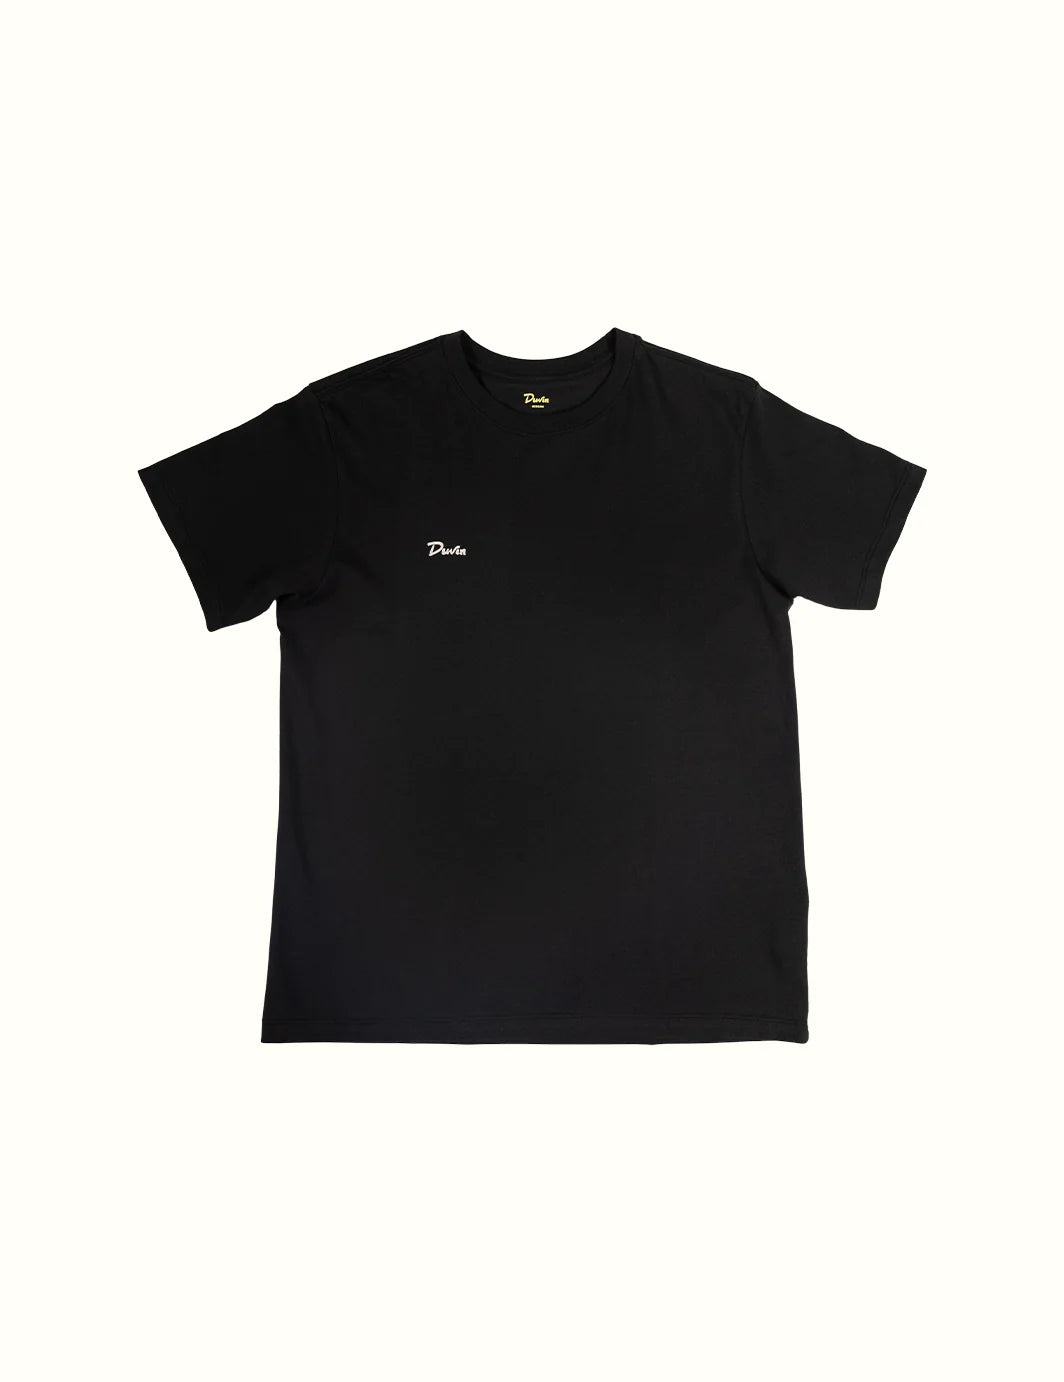 Duvin Basics Tee Black (SP 24) | Collective Request 